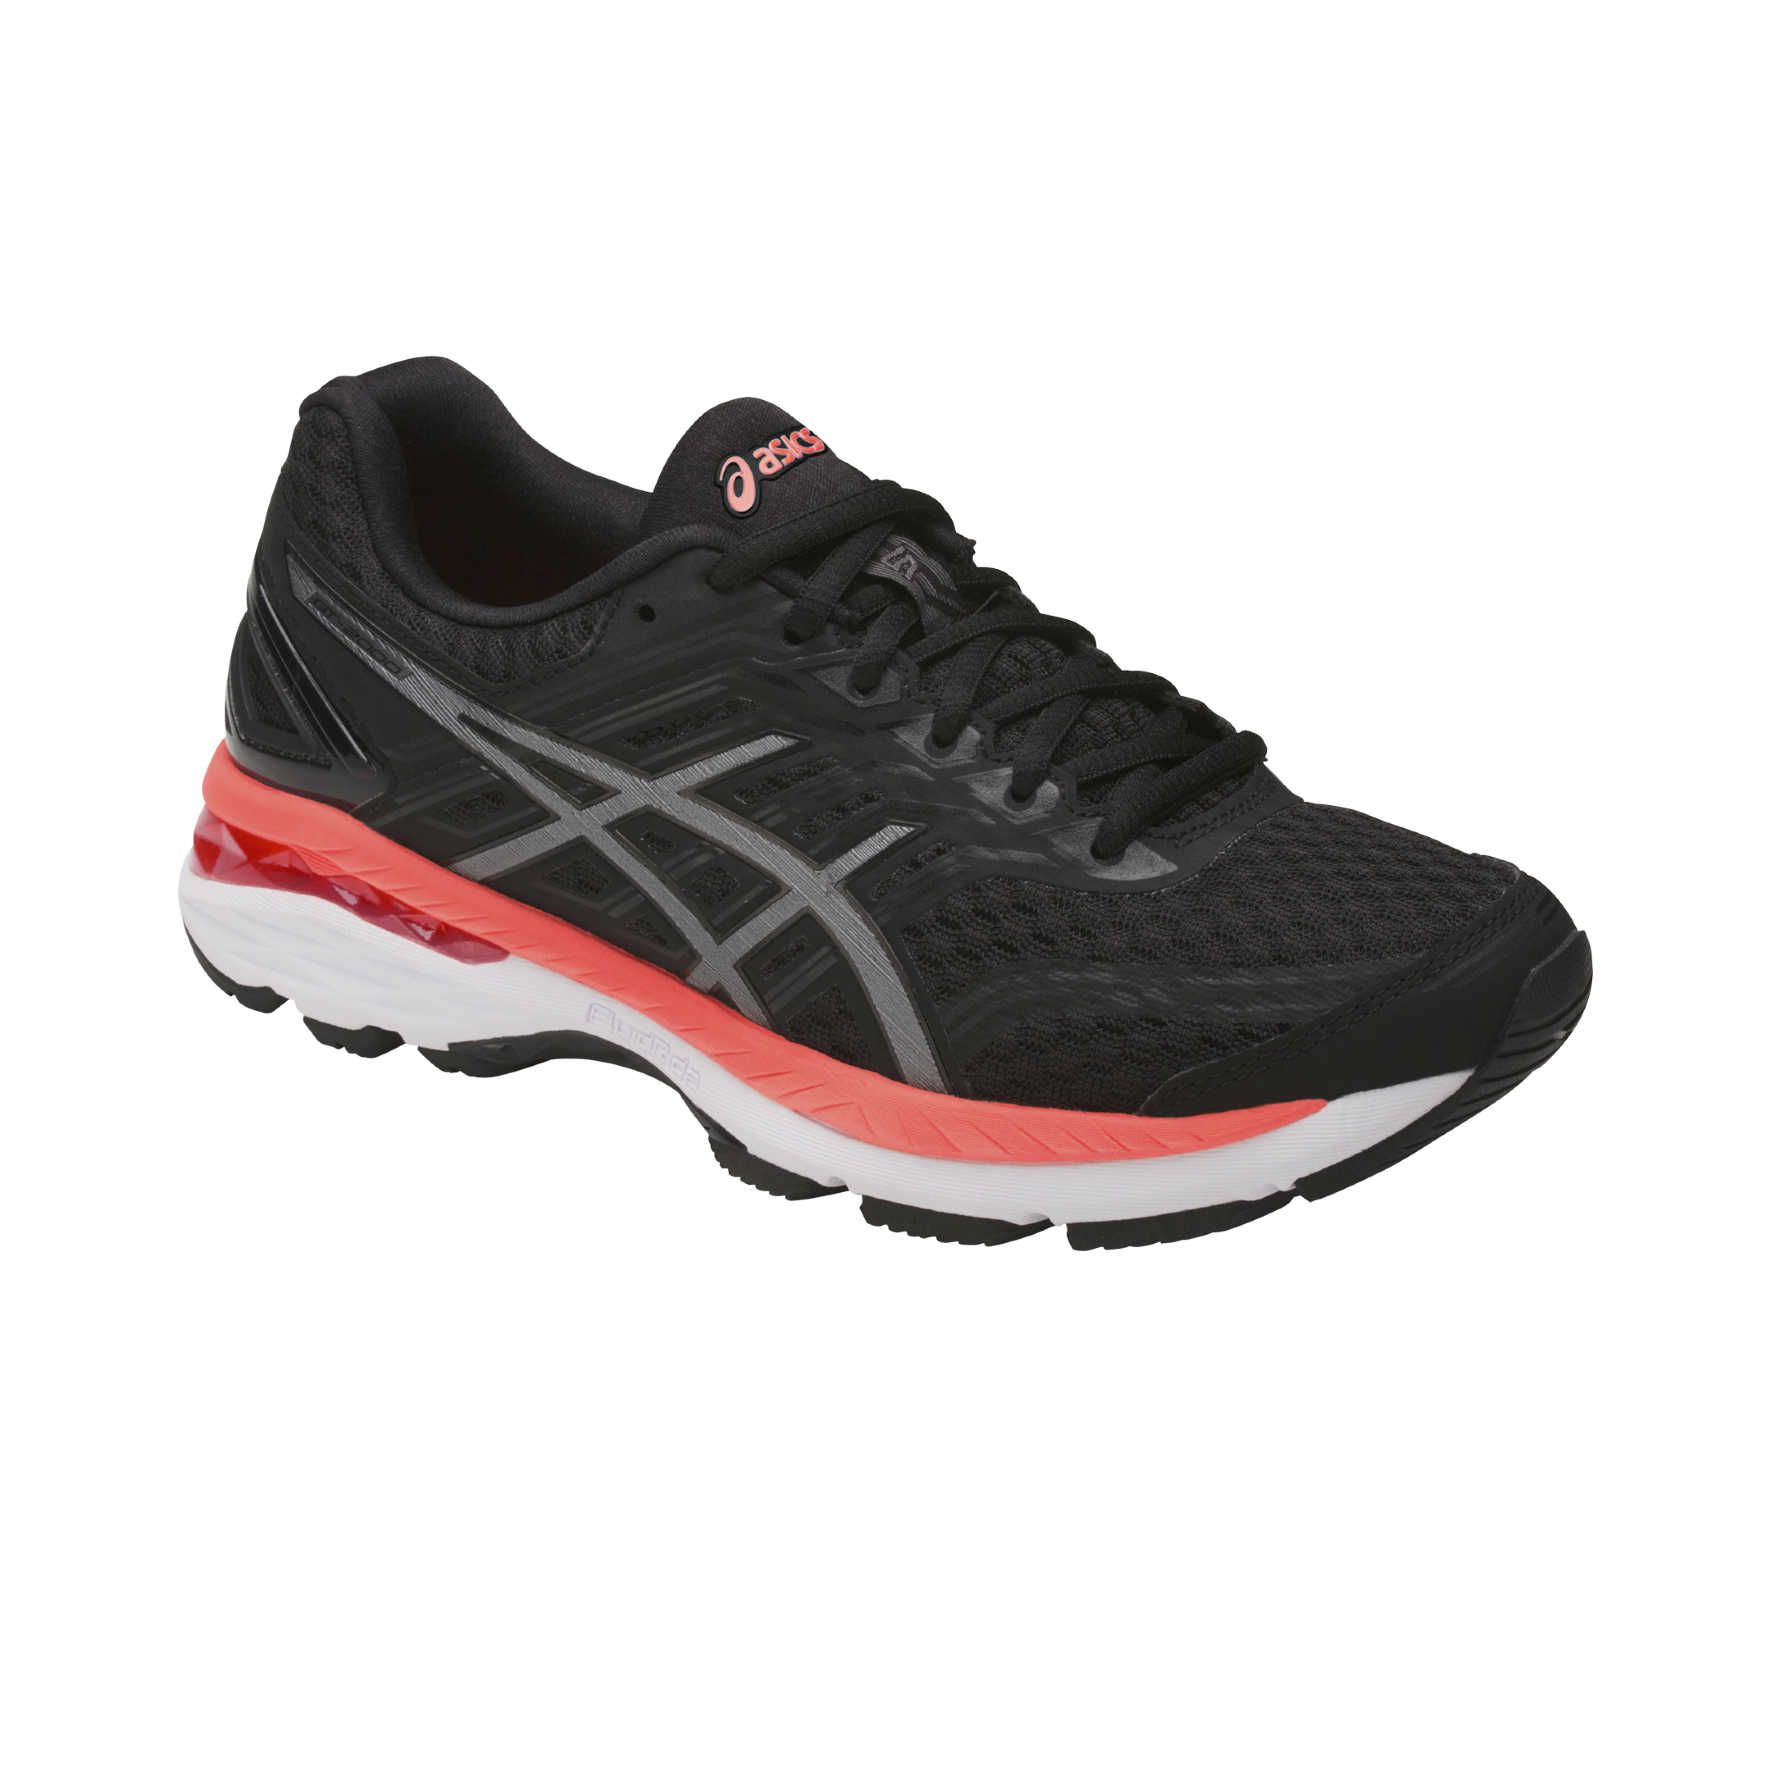 Chaussure running Femme GT-2000 5 - Black/Carbon/Flash Coral